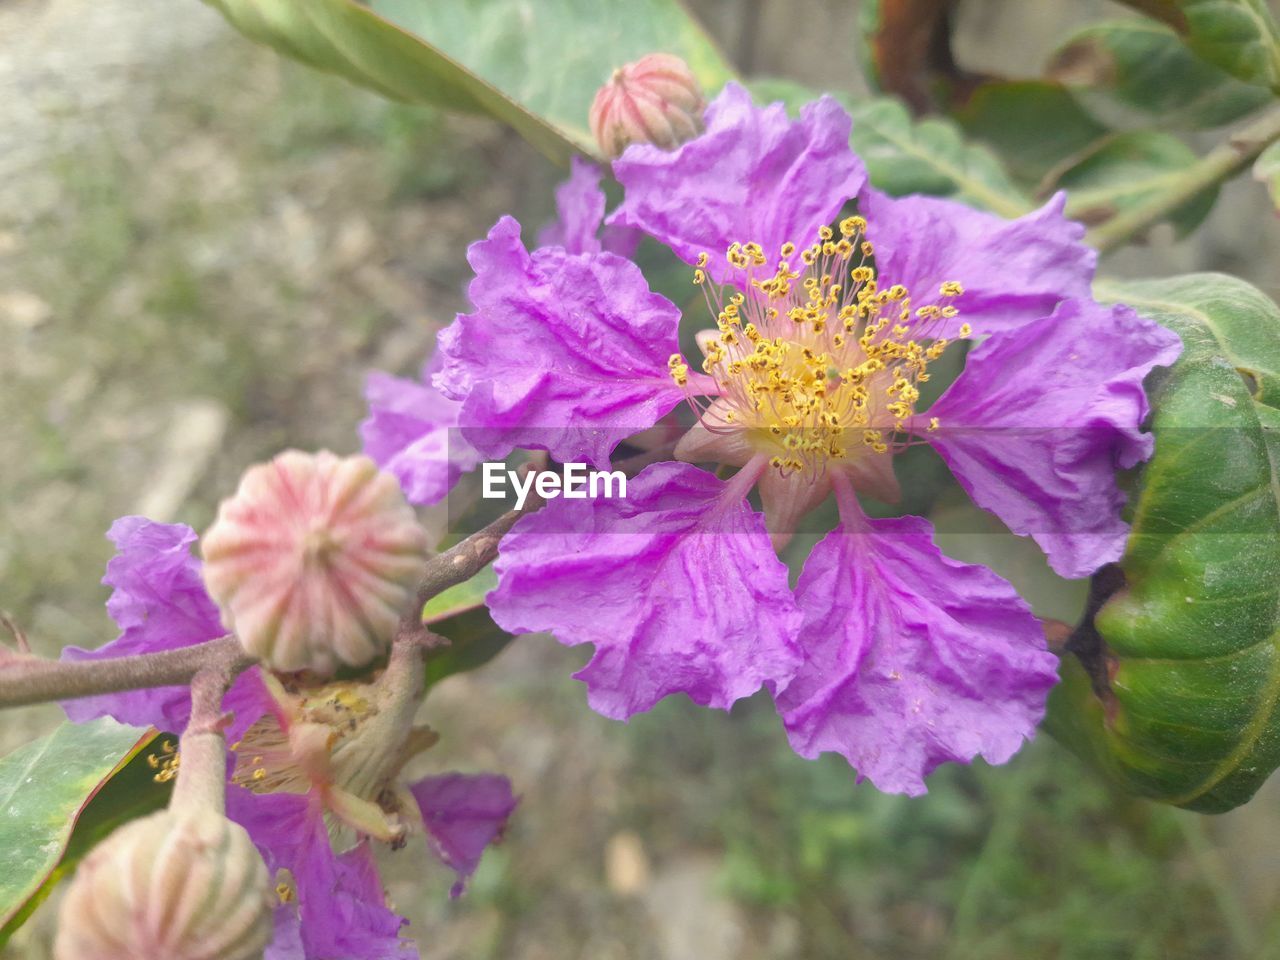 flowering plant, flower, plant, freshness, beauty in nature, purple, close-up, nature, flower head, fragility, growth, petal, pink, blossom, inflorescence, focus on foreground, wildflower, outdoors, plant part, day, leaf, animal wildlife, no people, pollen, botany